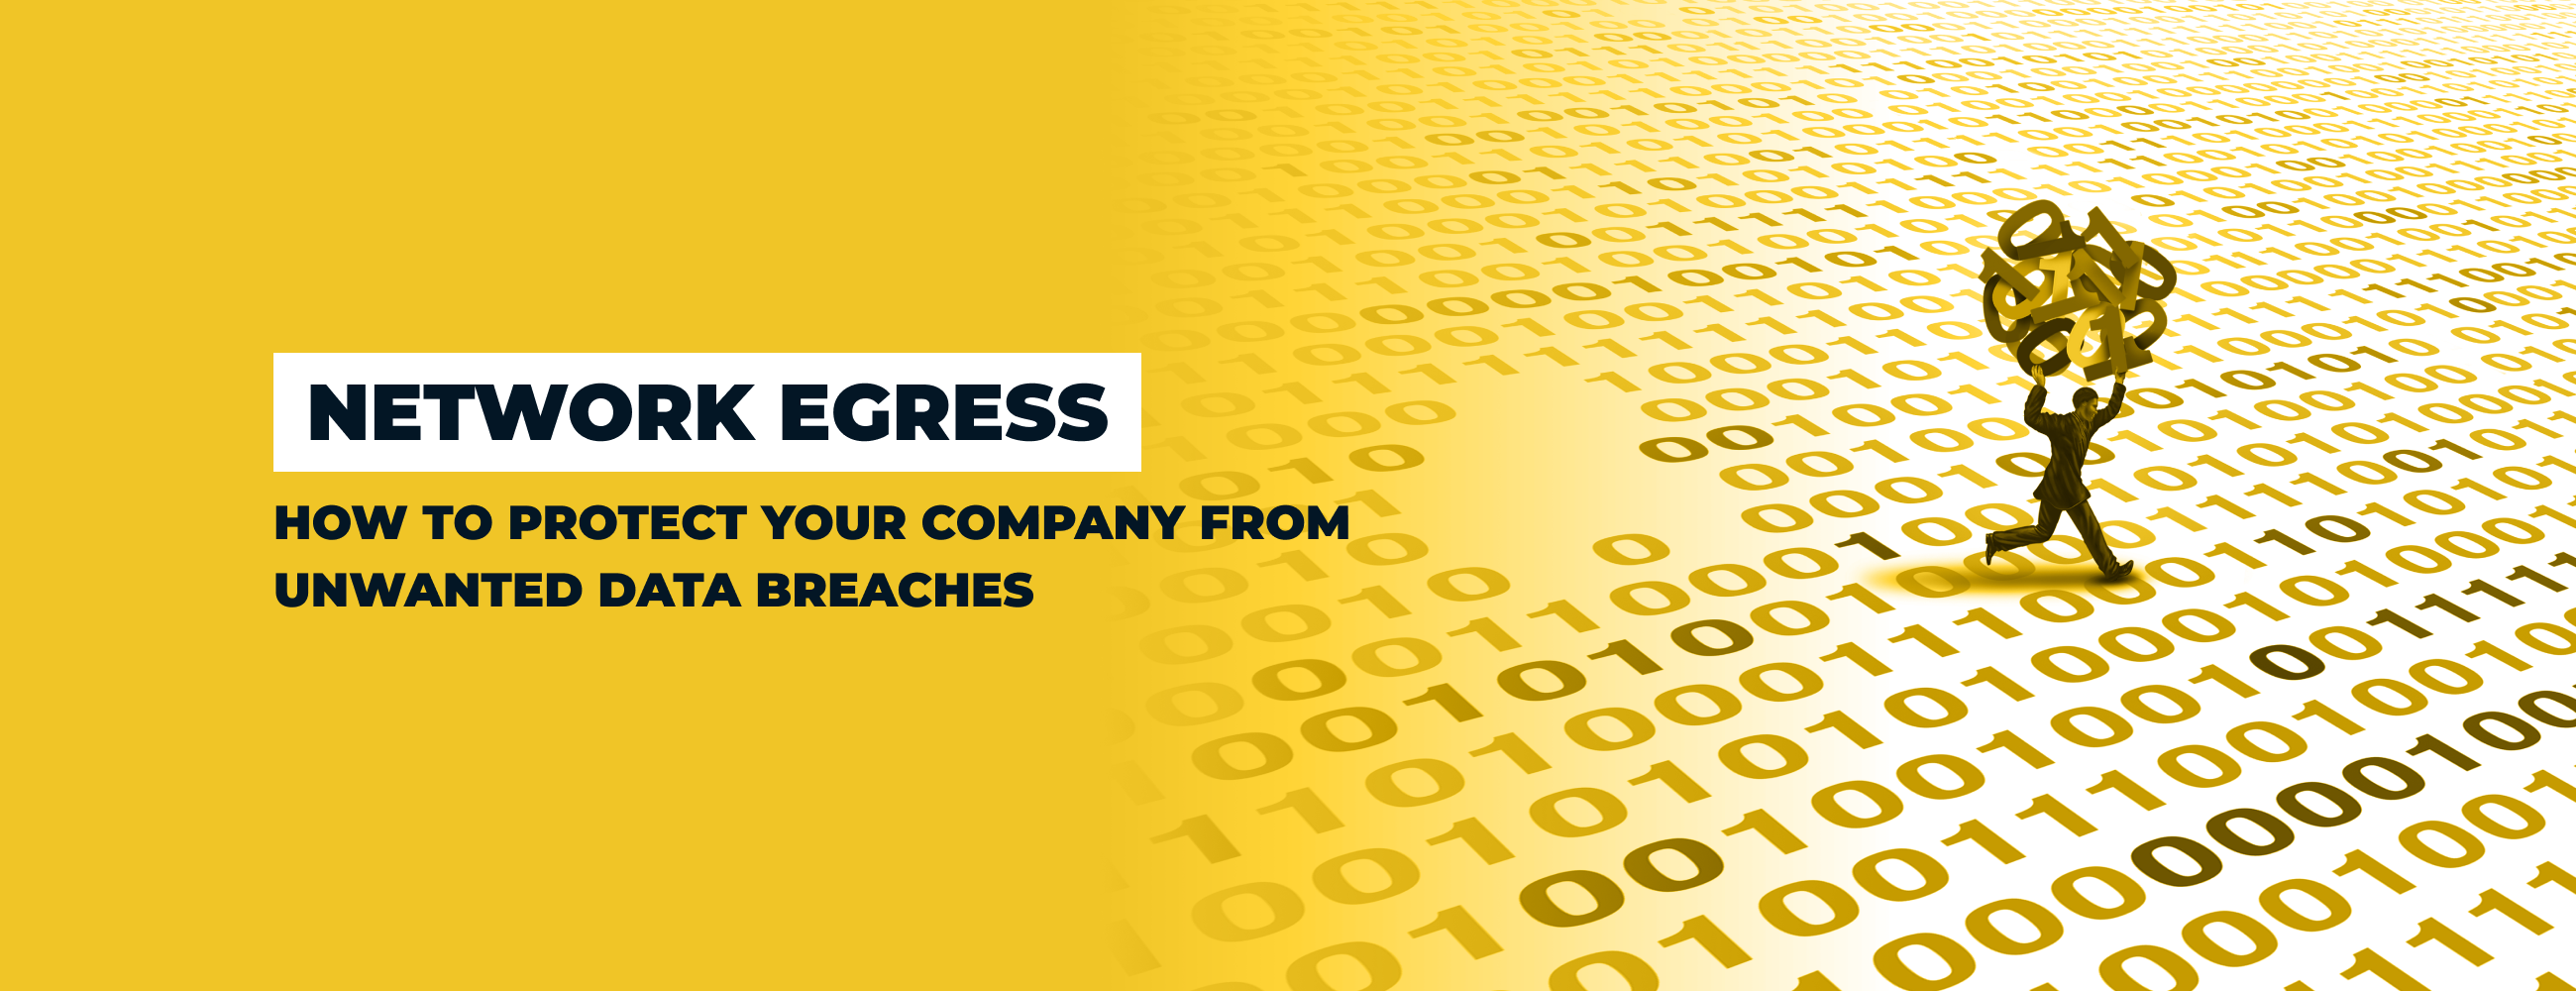 Network Egress: How to Protect Your Company From Unwanted Data Breaches